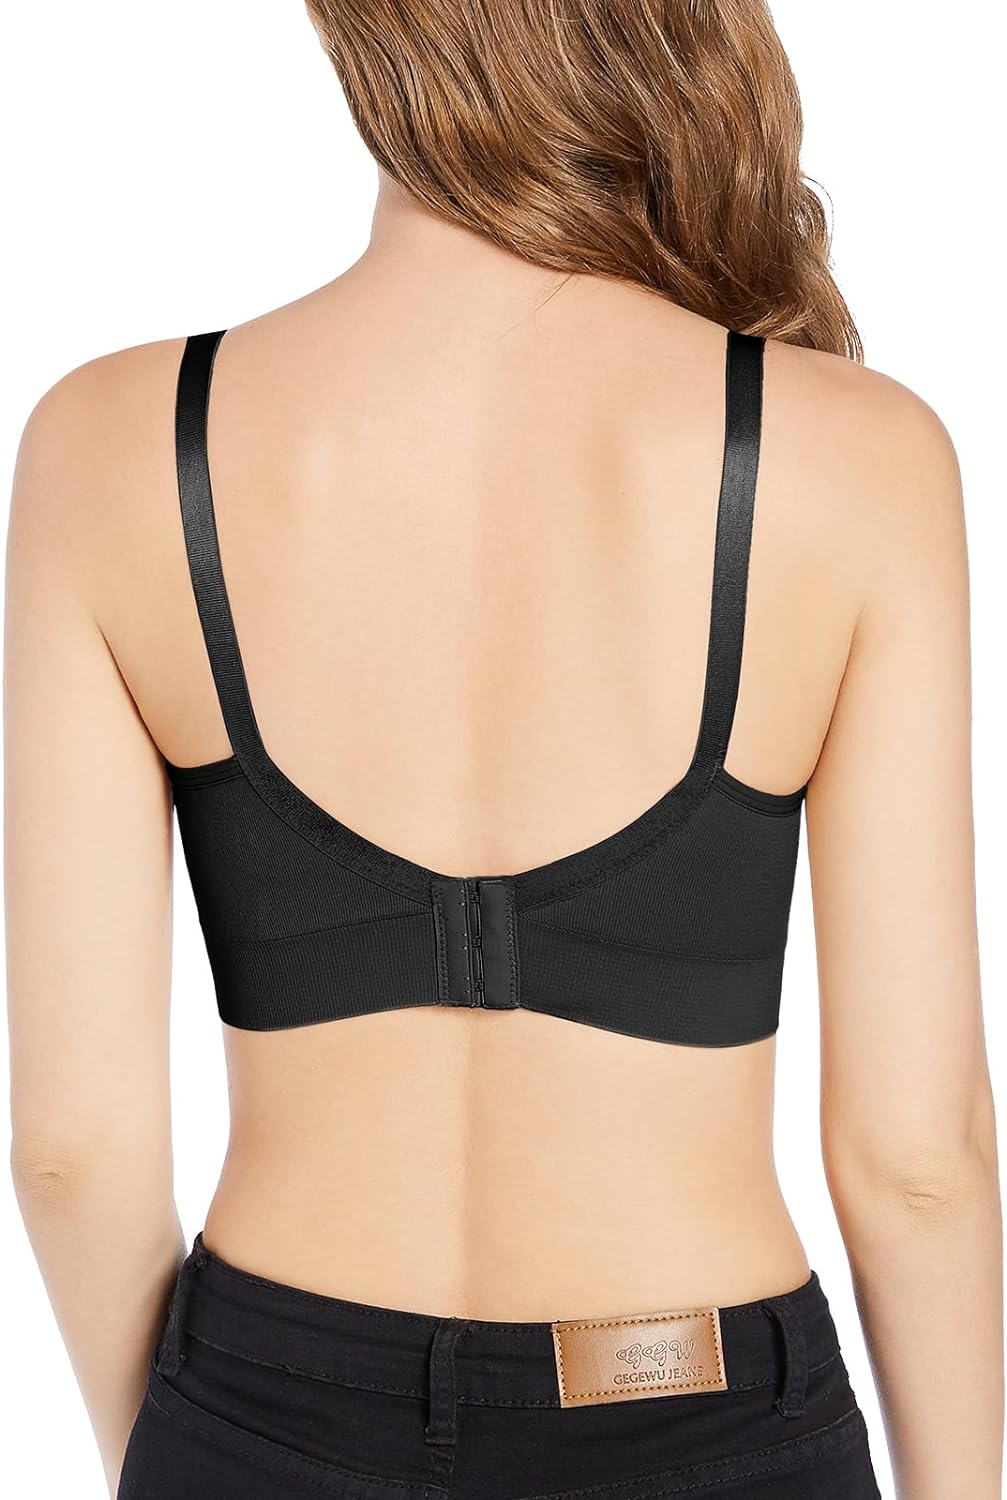 haakaa Pumping Bra Hands Free Maternity Bras for Breastfeeding Adjustable & No Underwire Breast Pump Bra with Bra Extender (Black, X-Large) at Amazon Women’s Clothing store